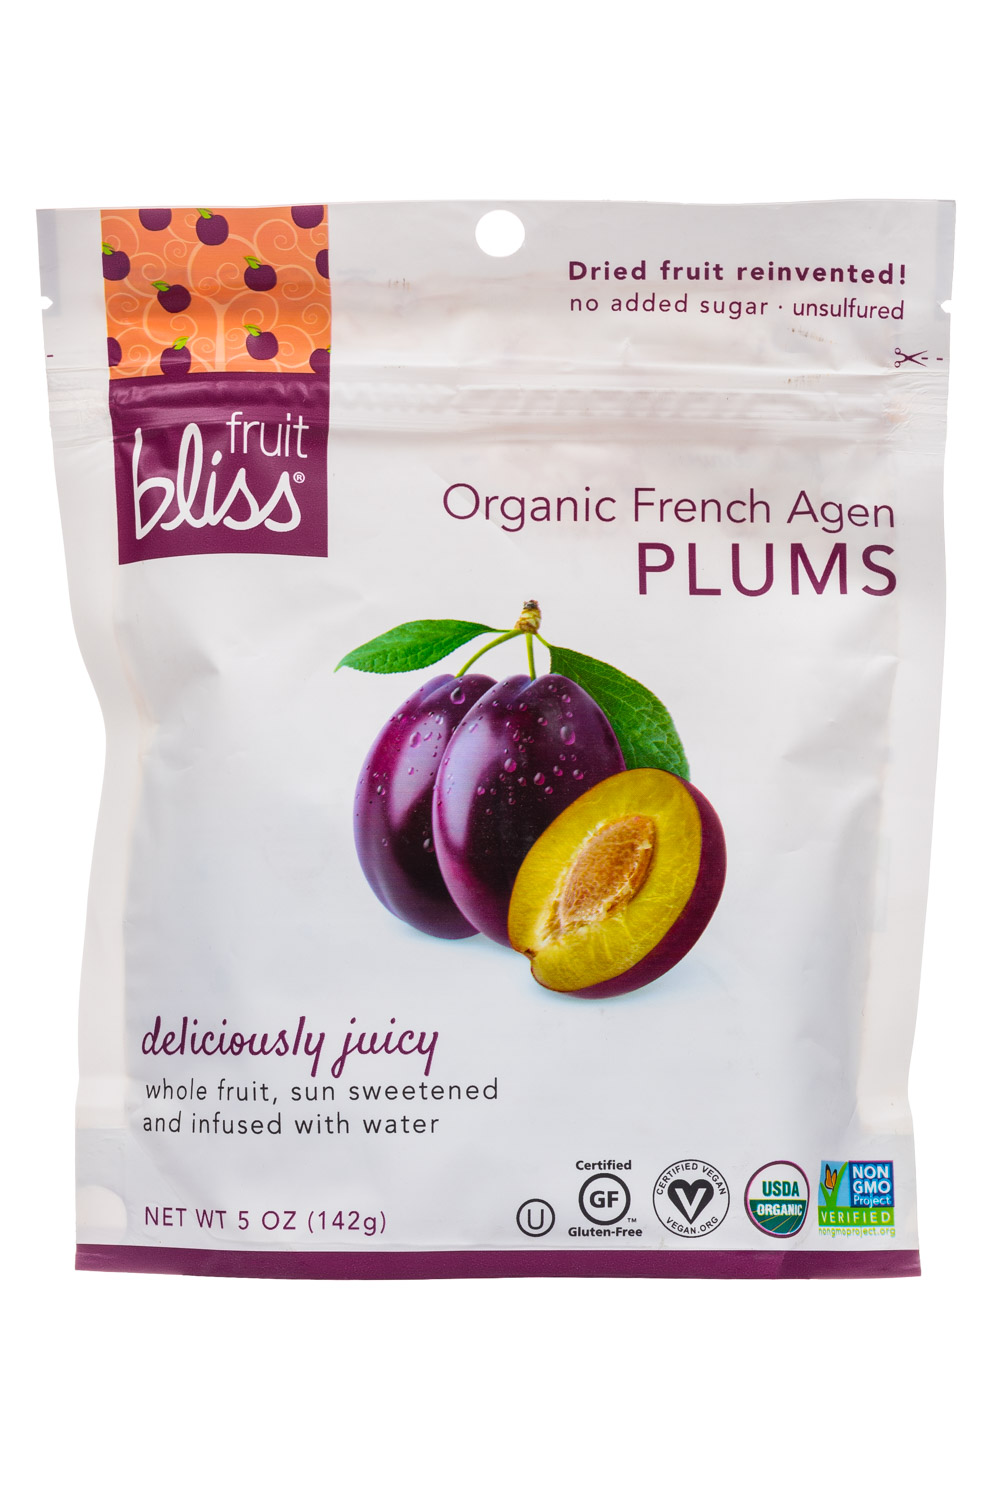 Organic French Agen Plums